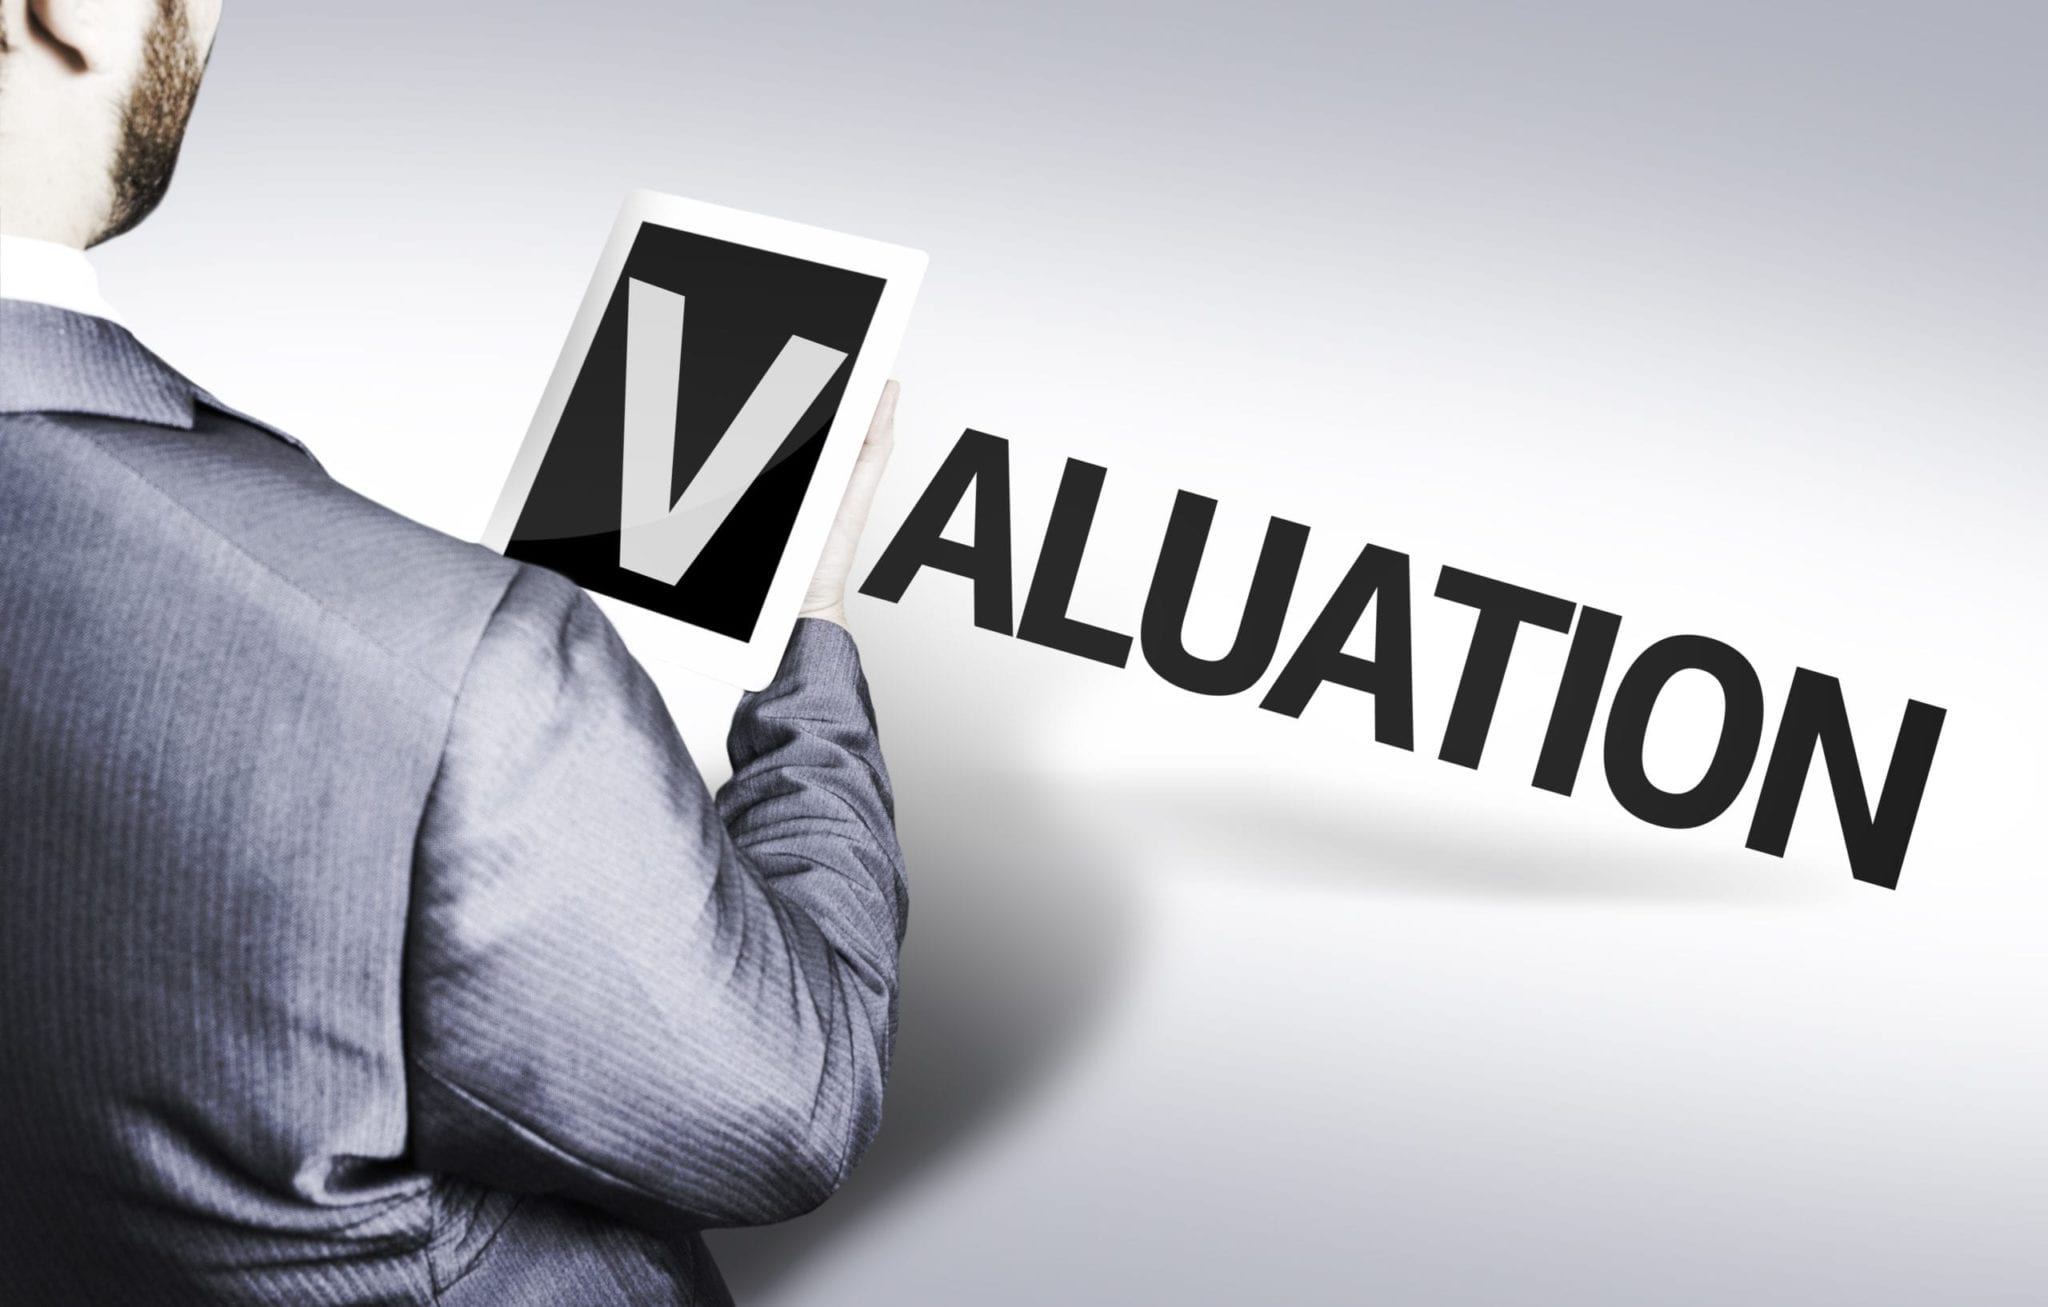 Business Valuation - St Louis CPA Firm